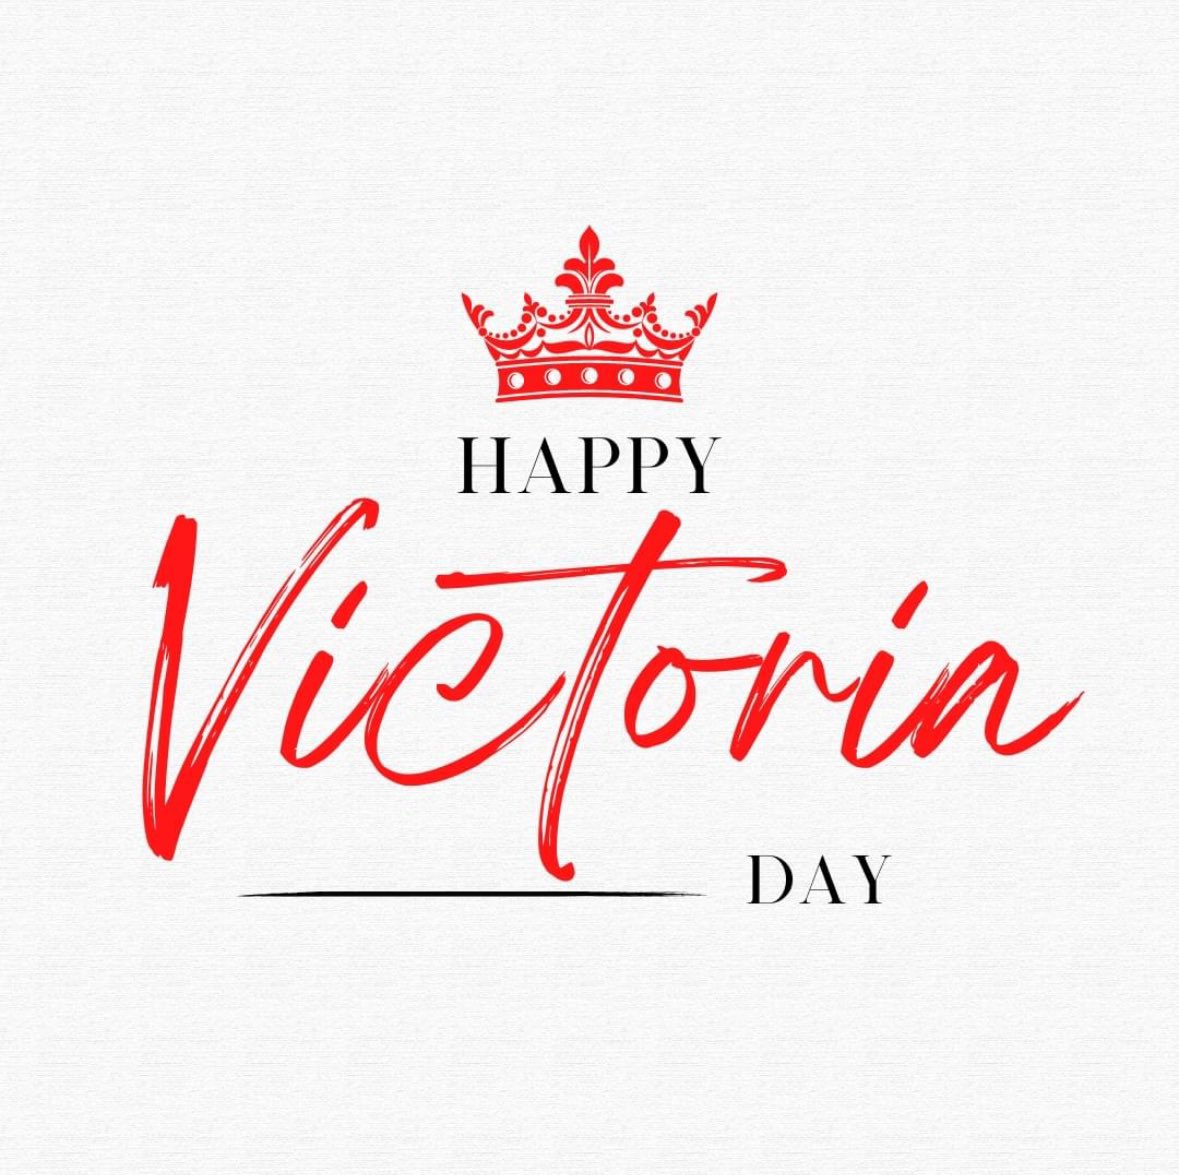 I want to wish my Morinville - St. Albert constituents and all Albertans a very Happy Victoria Day! #VictoriaDay2024